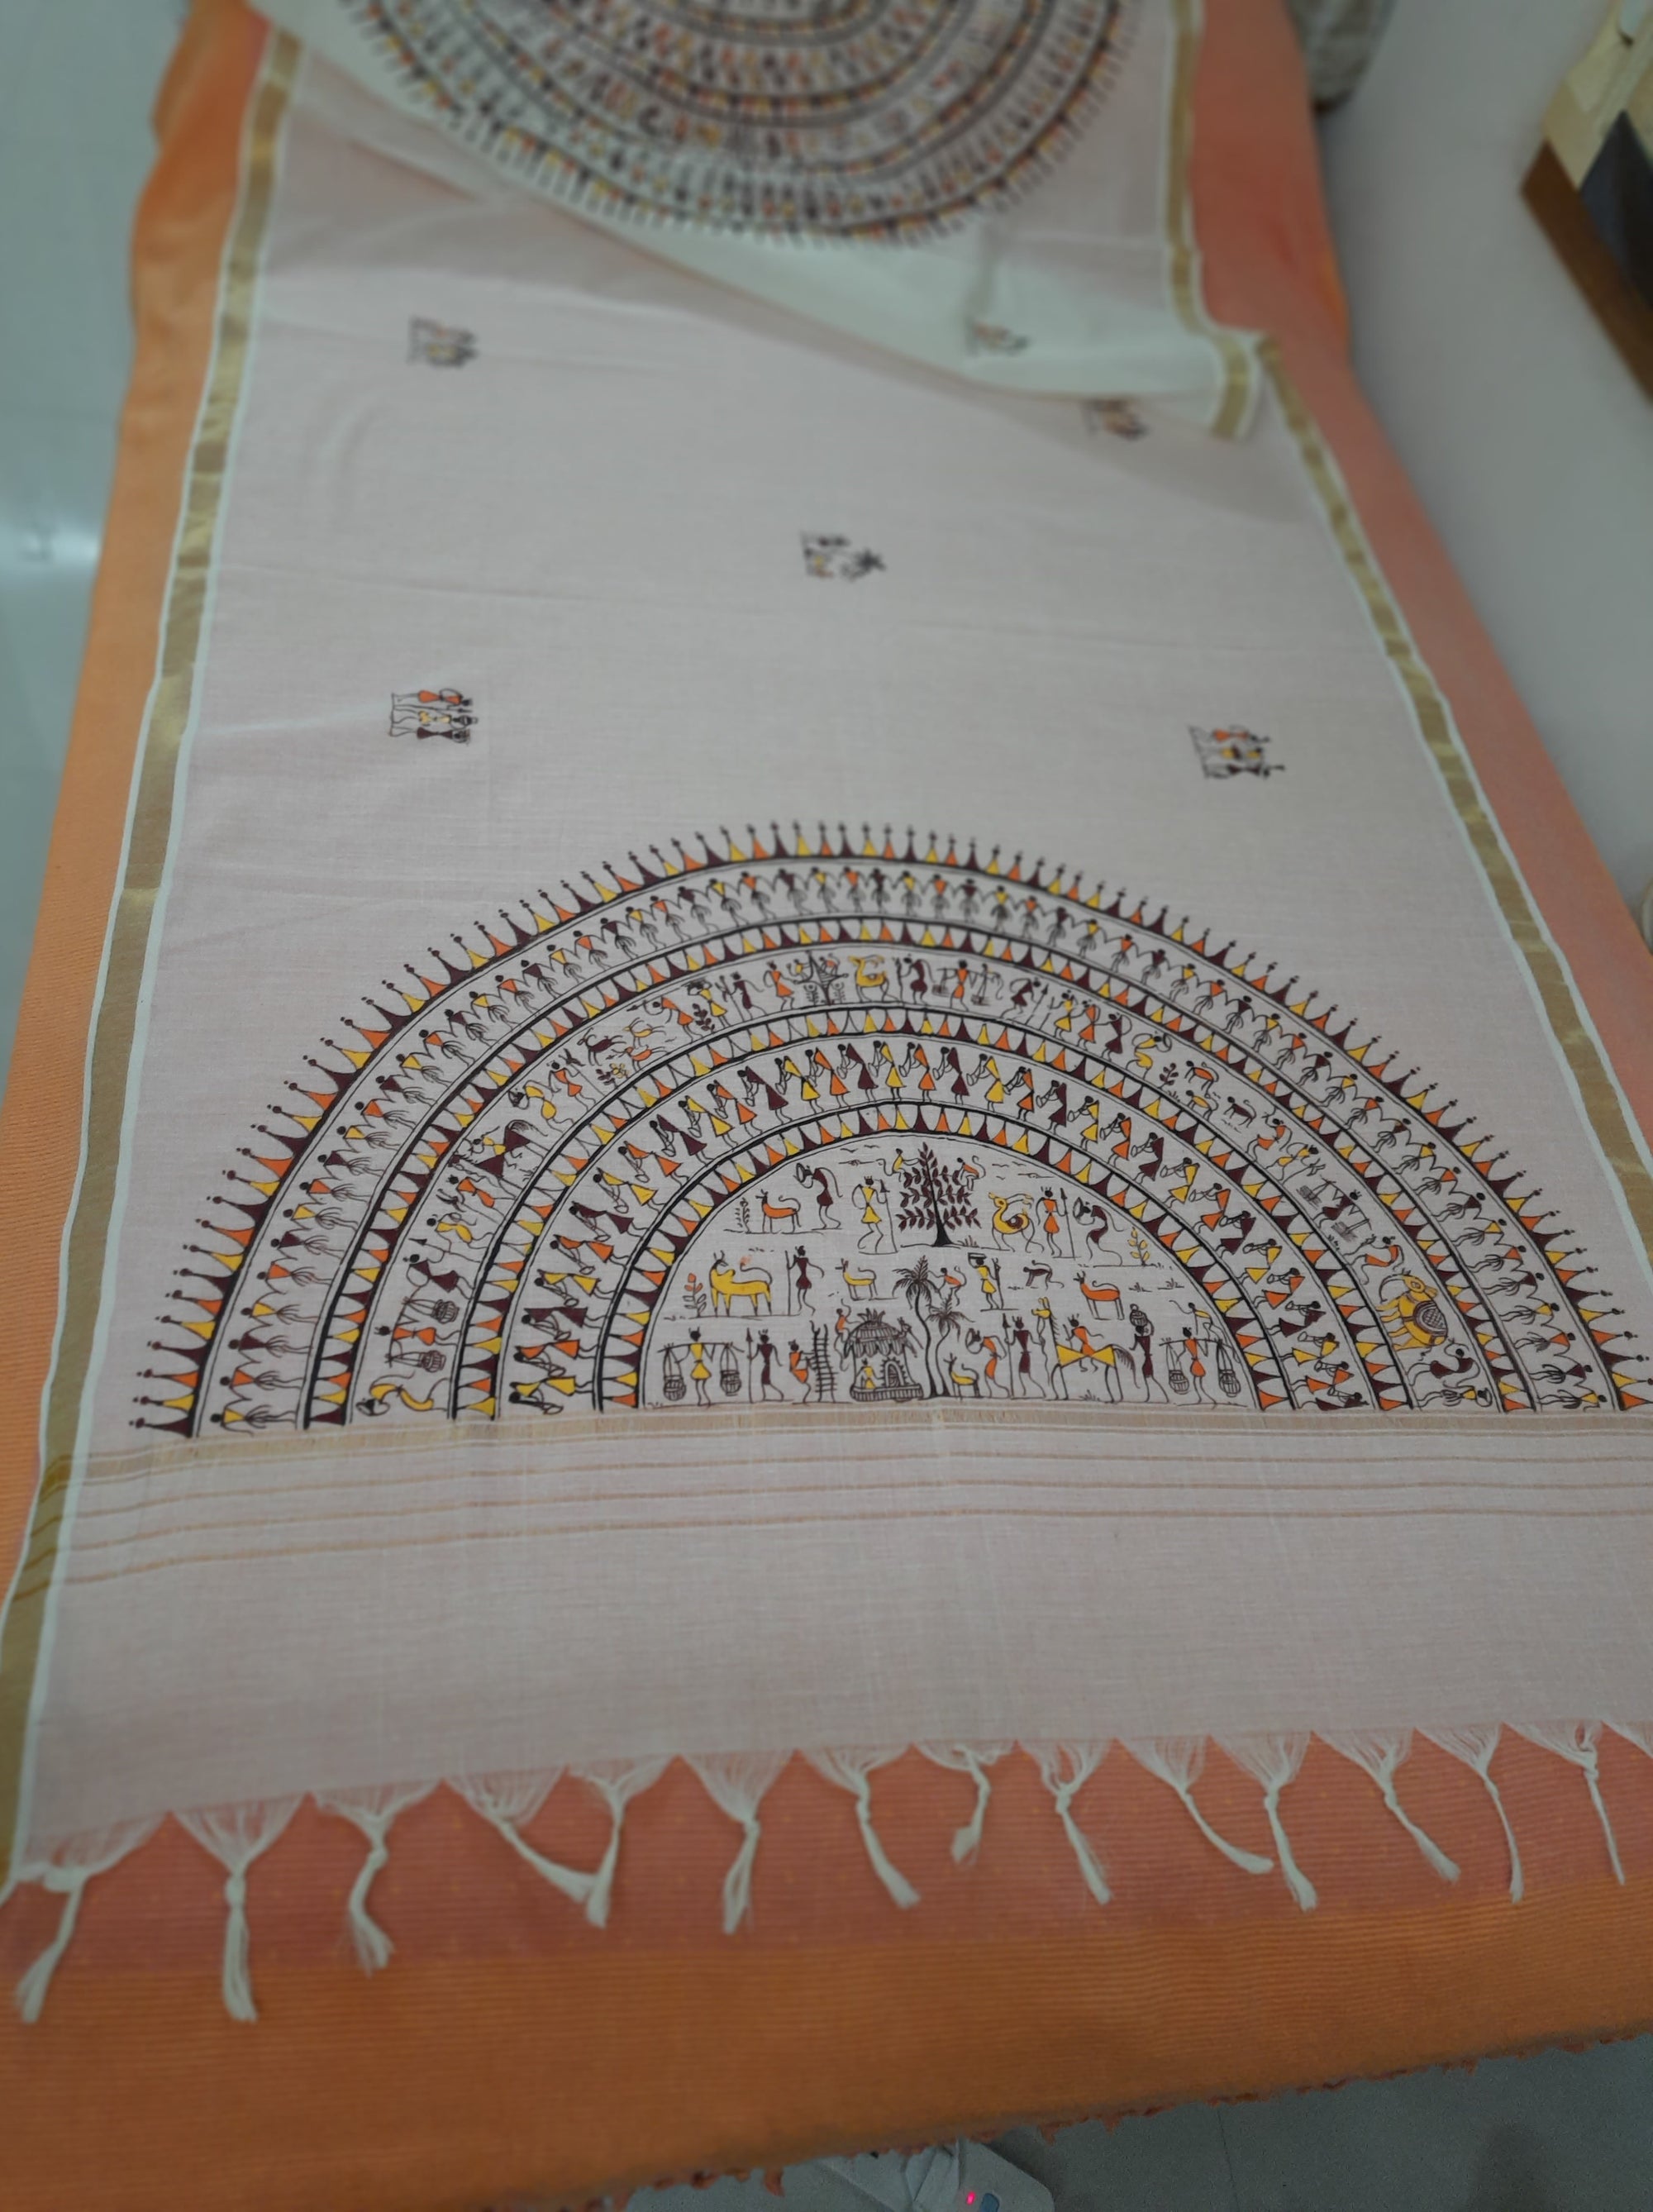 Off-White Dupatta with handpainted tribal motifs